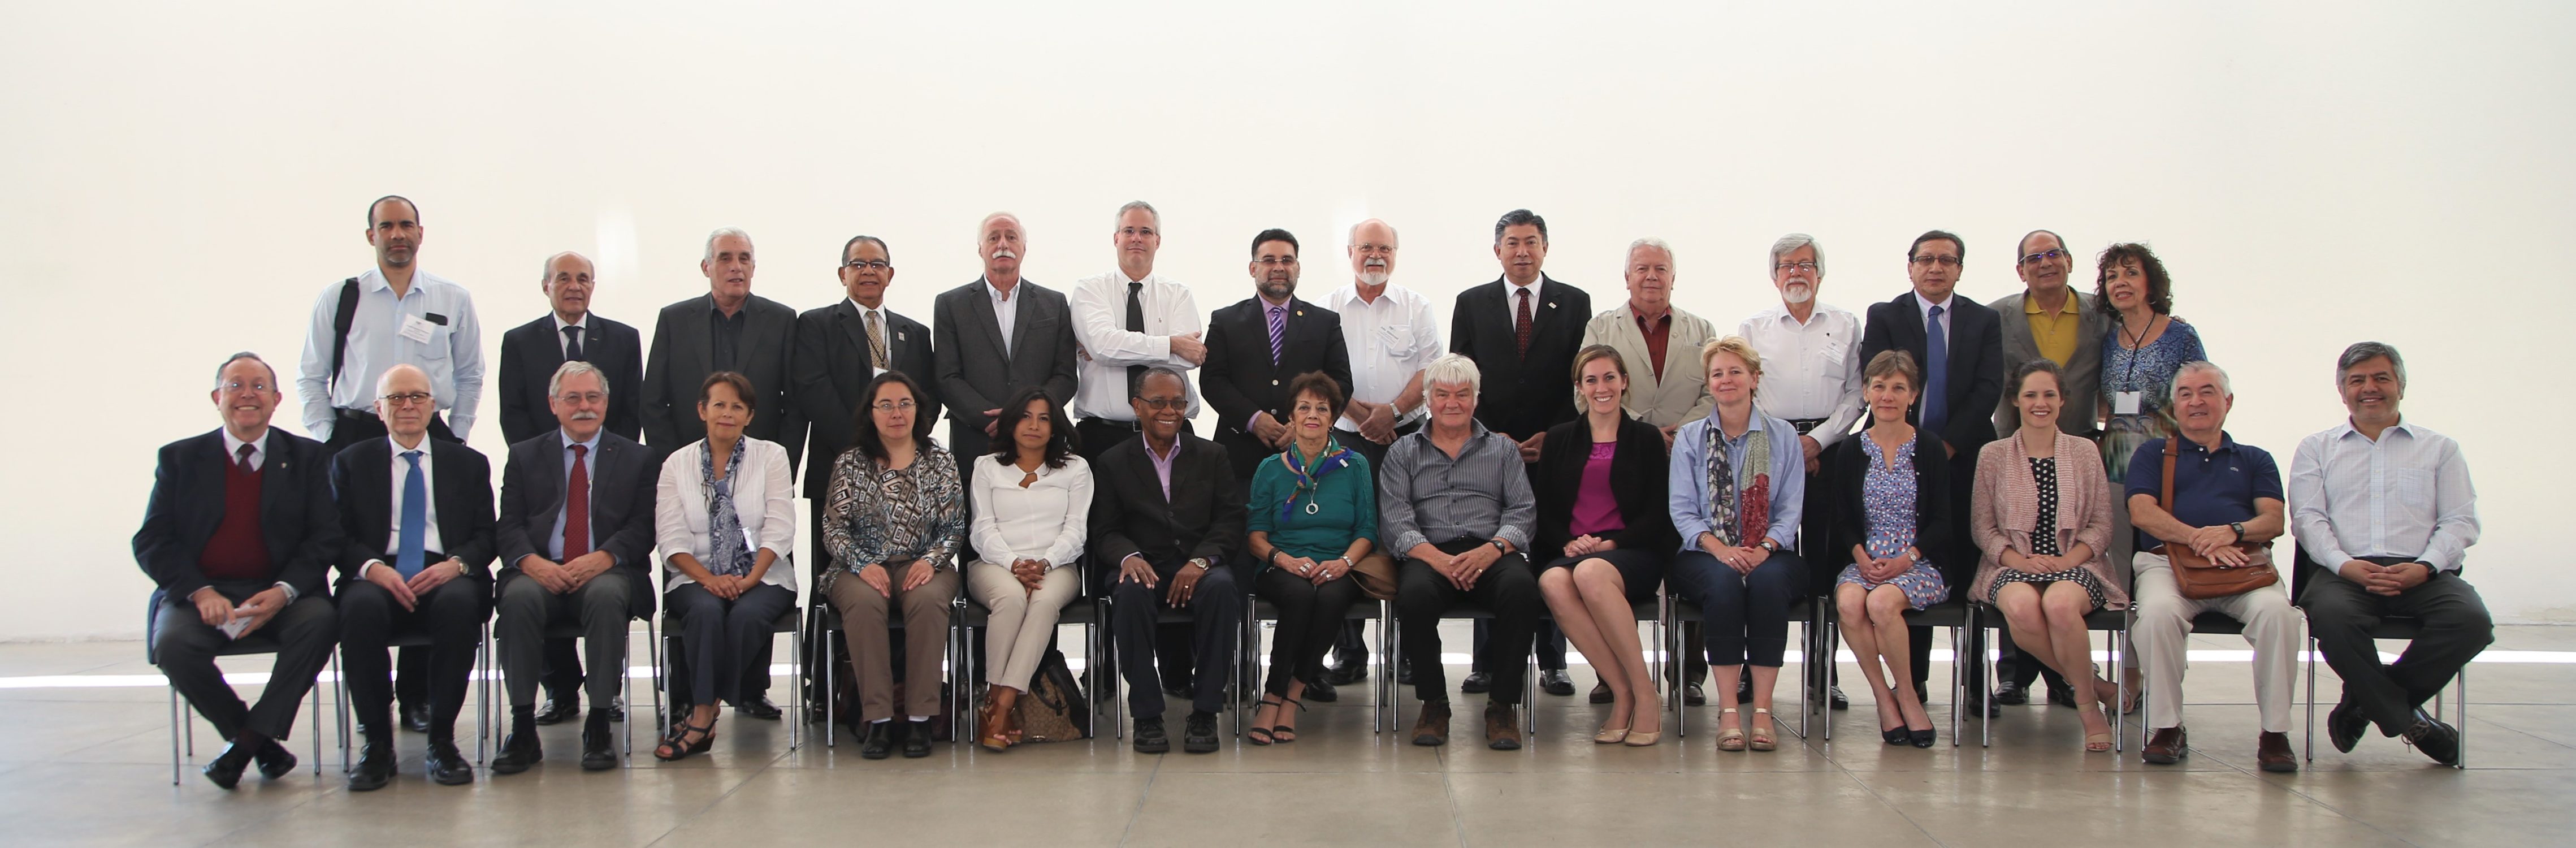 GYA members Daniel Limonta Velázquez (from left to right, first in the back row) and Teresa Stoepler (from right to left, sixth in the front row) in a group photo of workshop participants